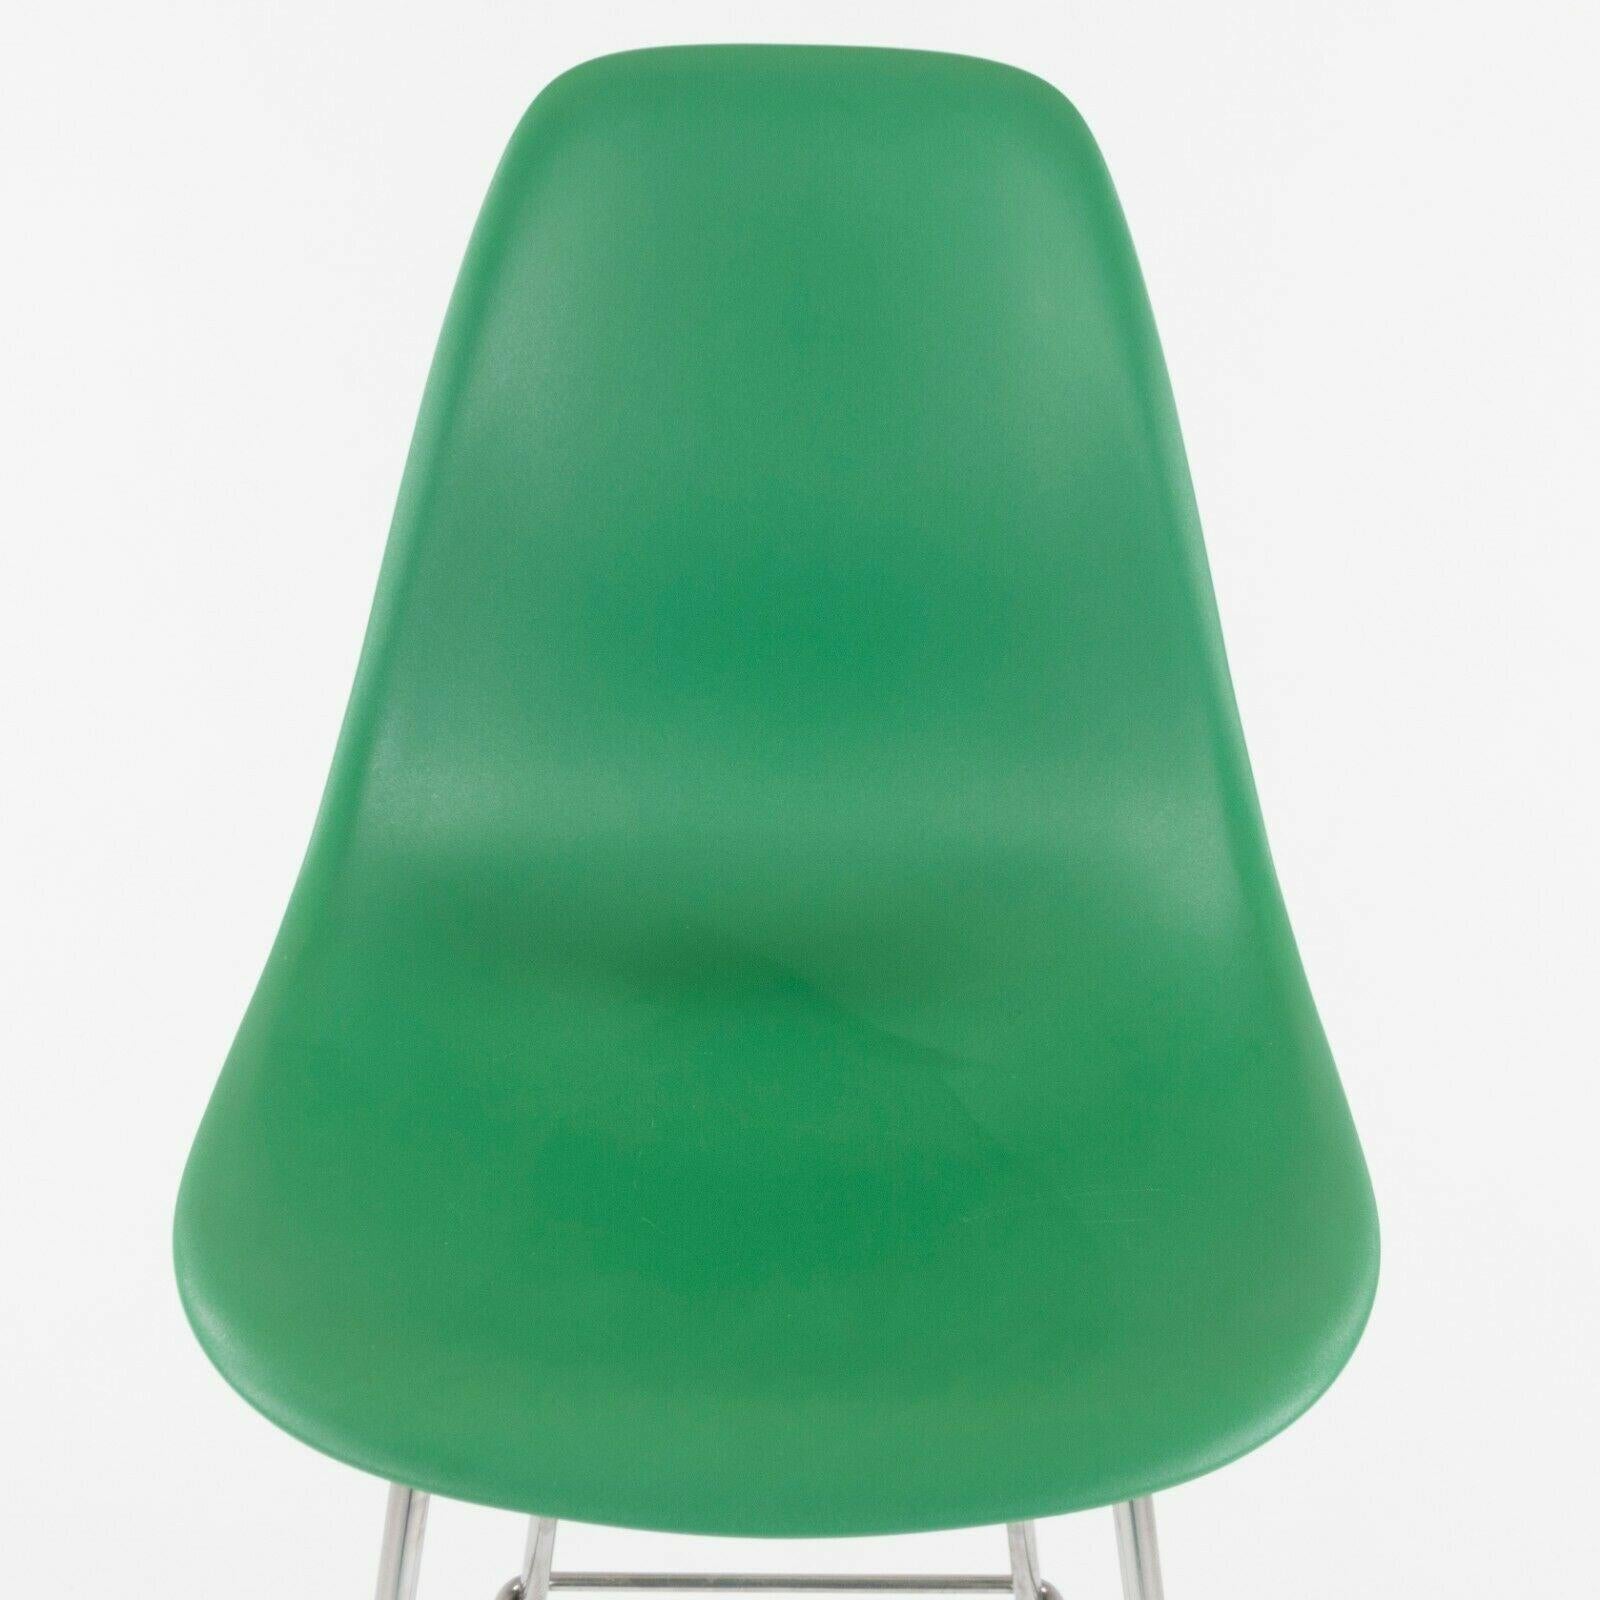 Ray and Charles Eames Herman Miller Molded Shell Bar Stool Chair Kelly Green For Sale 4